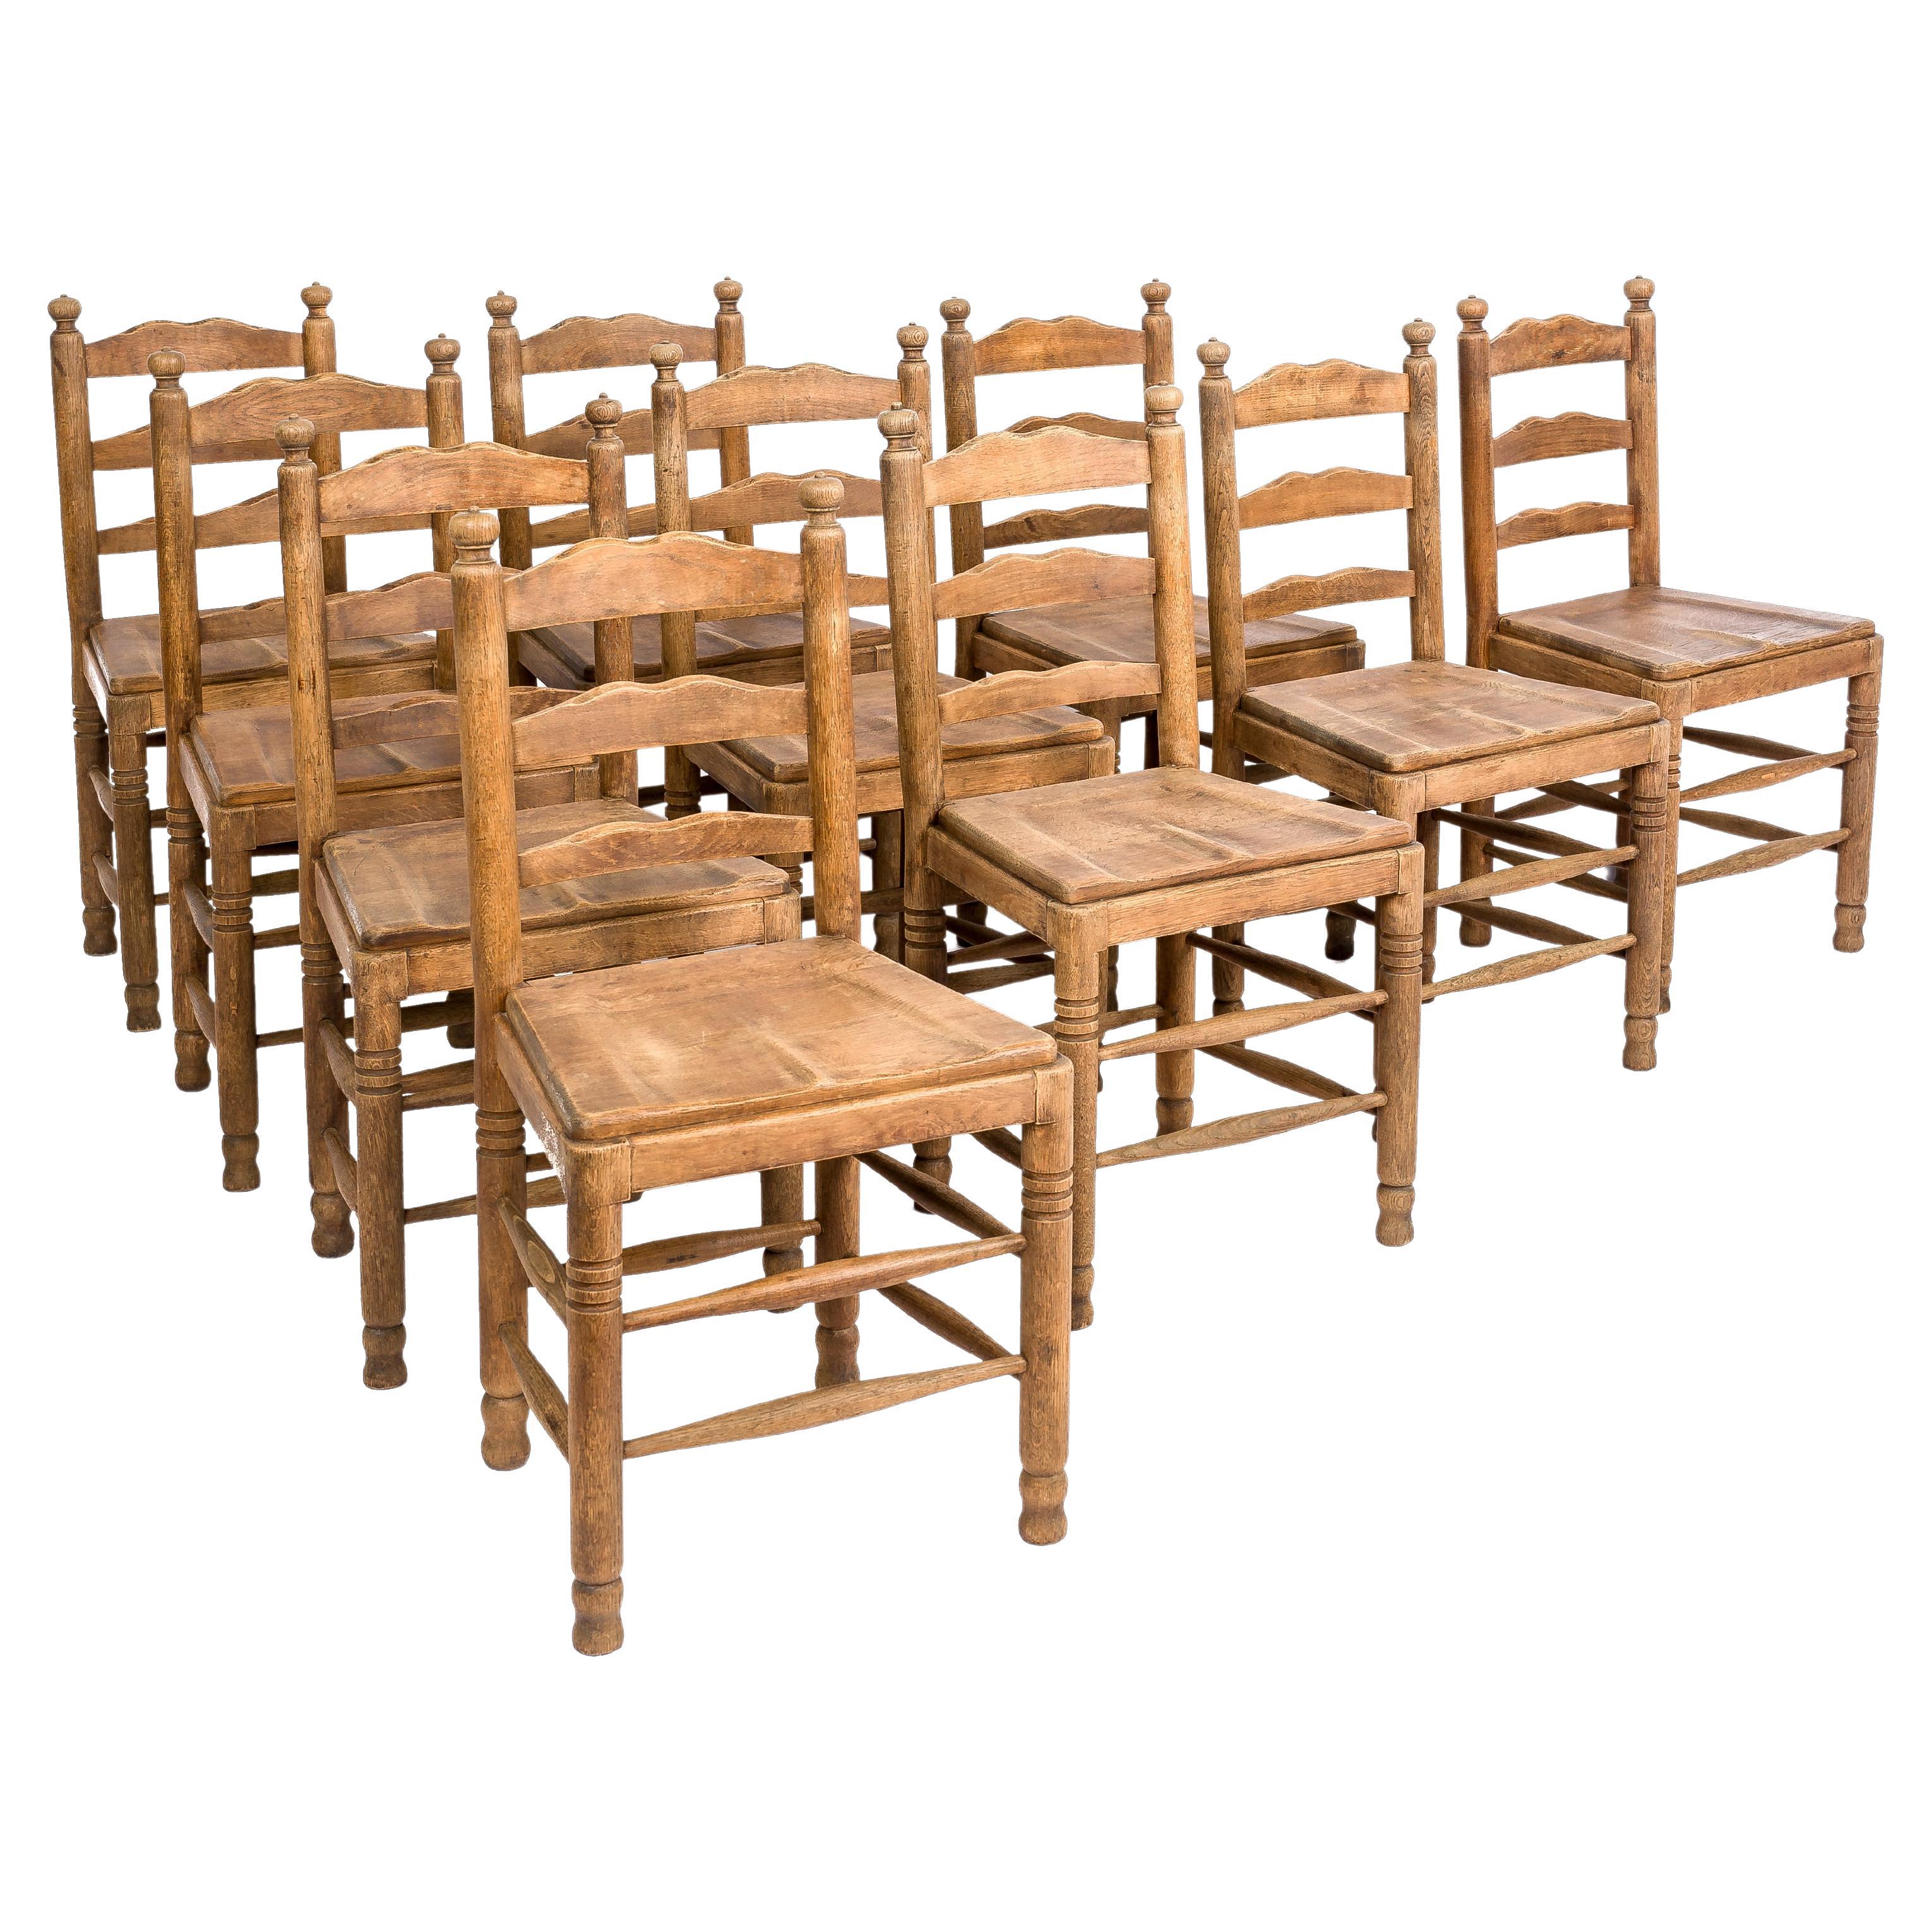 A beautiful large set of 10 dining chairs that originate in a Northern French monastery. 
The chairs were made in the finest quality European summer oak in the late 1800s. The set presented here has 10 chairs, but we have 42 pieces available. The